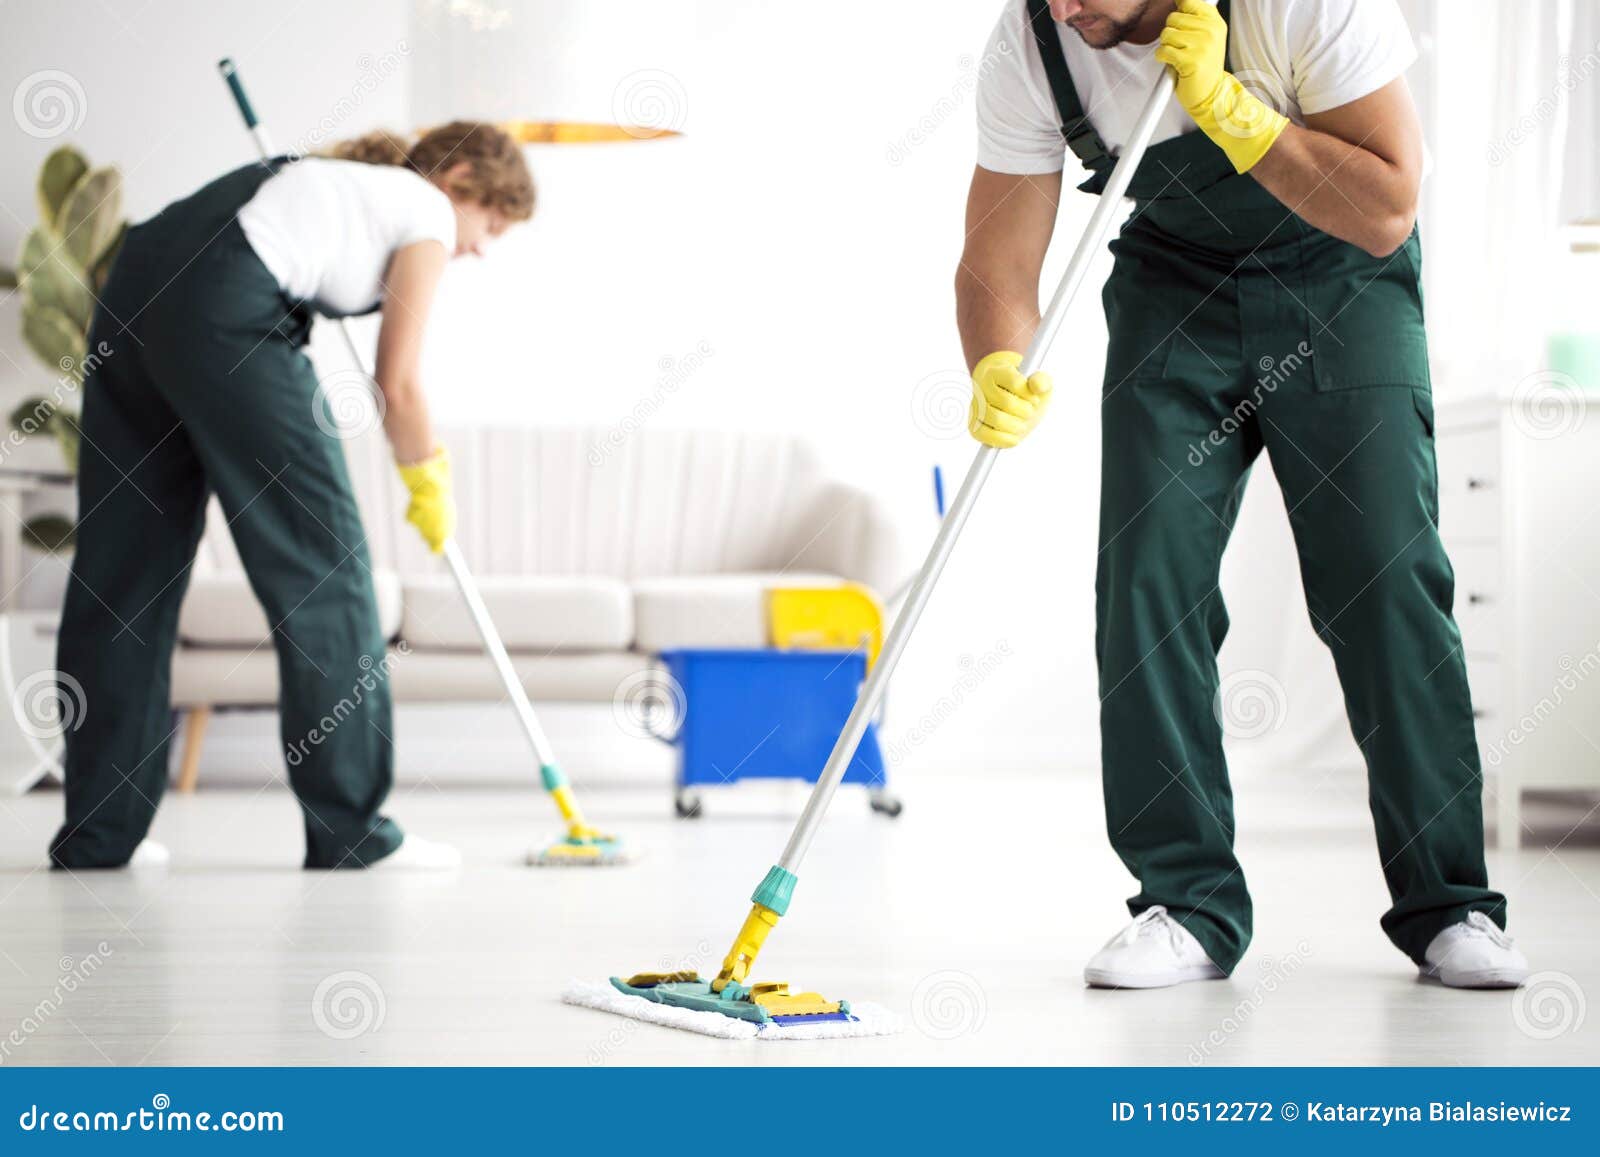 professional cleaning crew washing floor